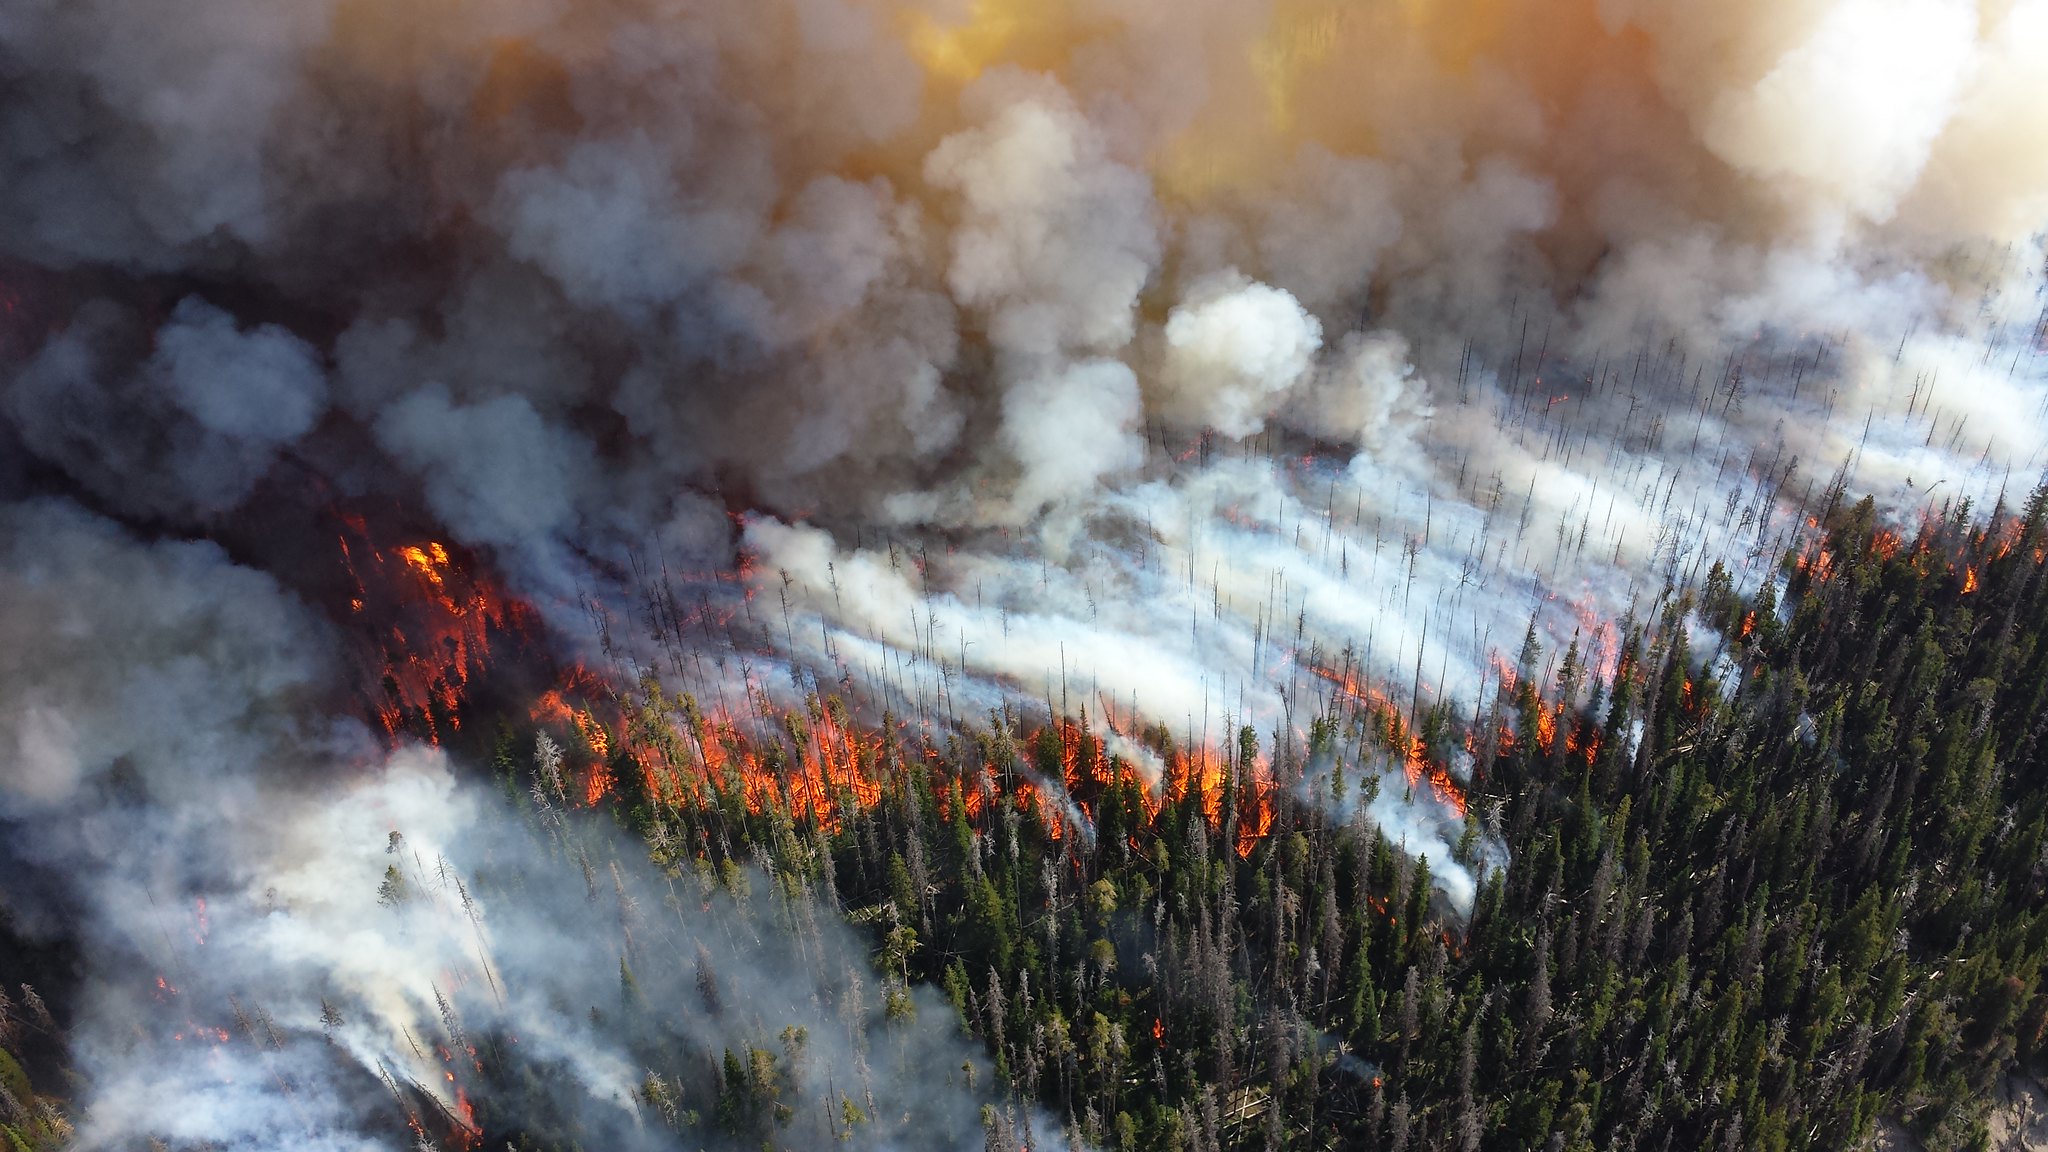 2013 photo of the Alder Fire in Yellowstone National Park. Photo by Mike Lewelling, National Park Service